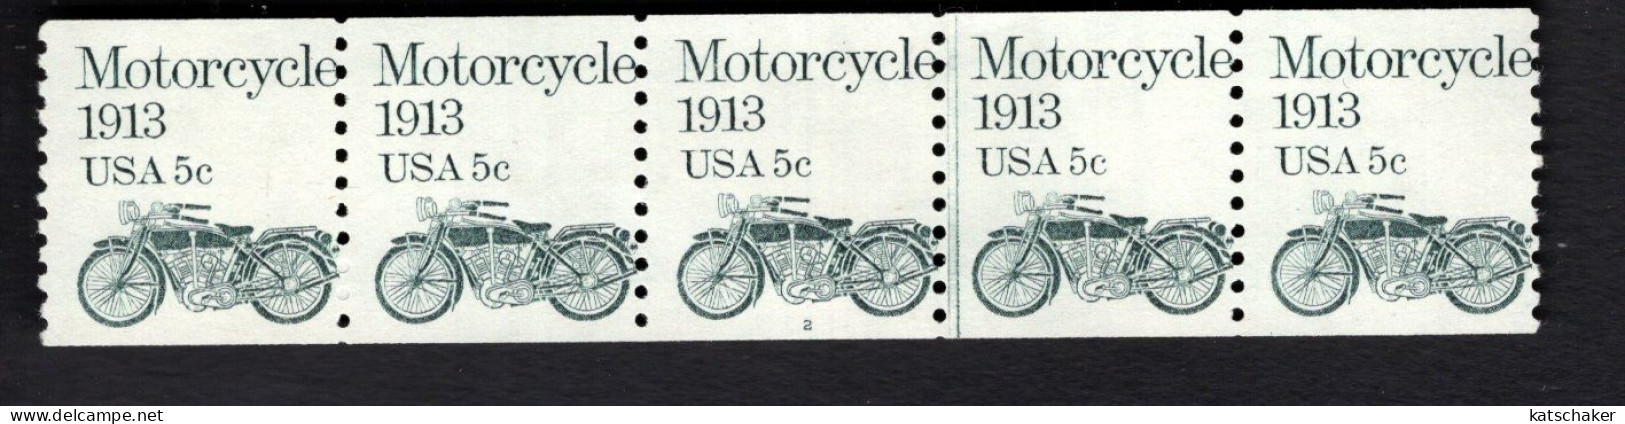 2024582519 1983 SCOTT1899 (XX) POSTFRIS MINT NEVER HINGED - STRIP OF5 MOTORCYCLE AND PLATE NUMBER 2 - Rollen (Plaatnummers)